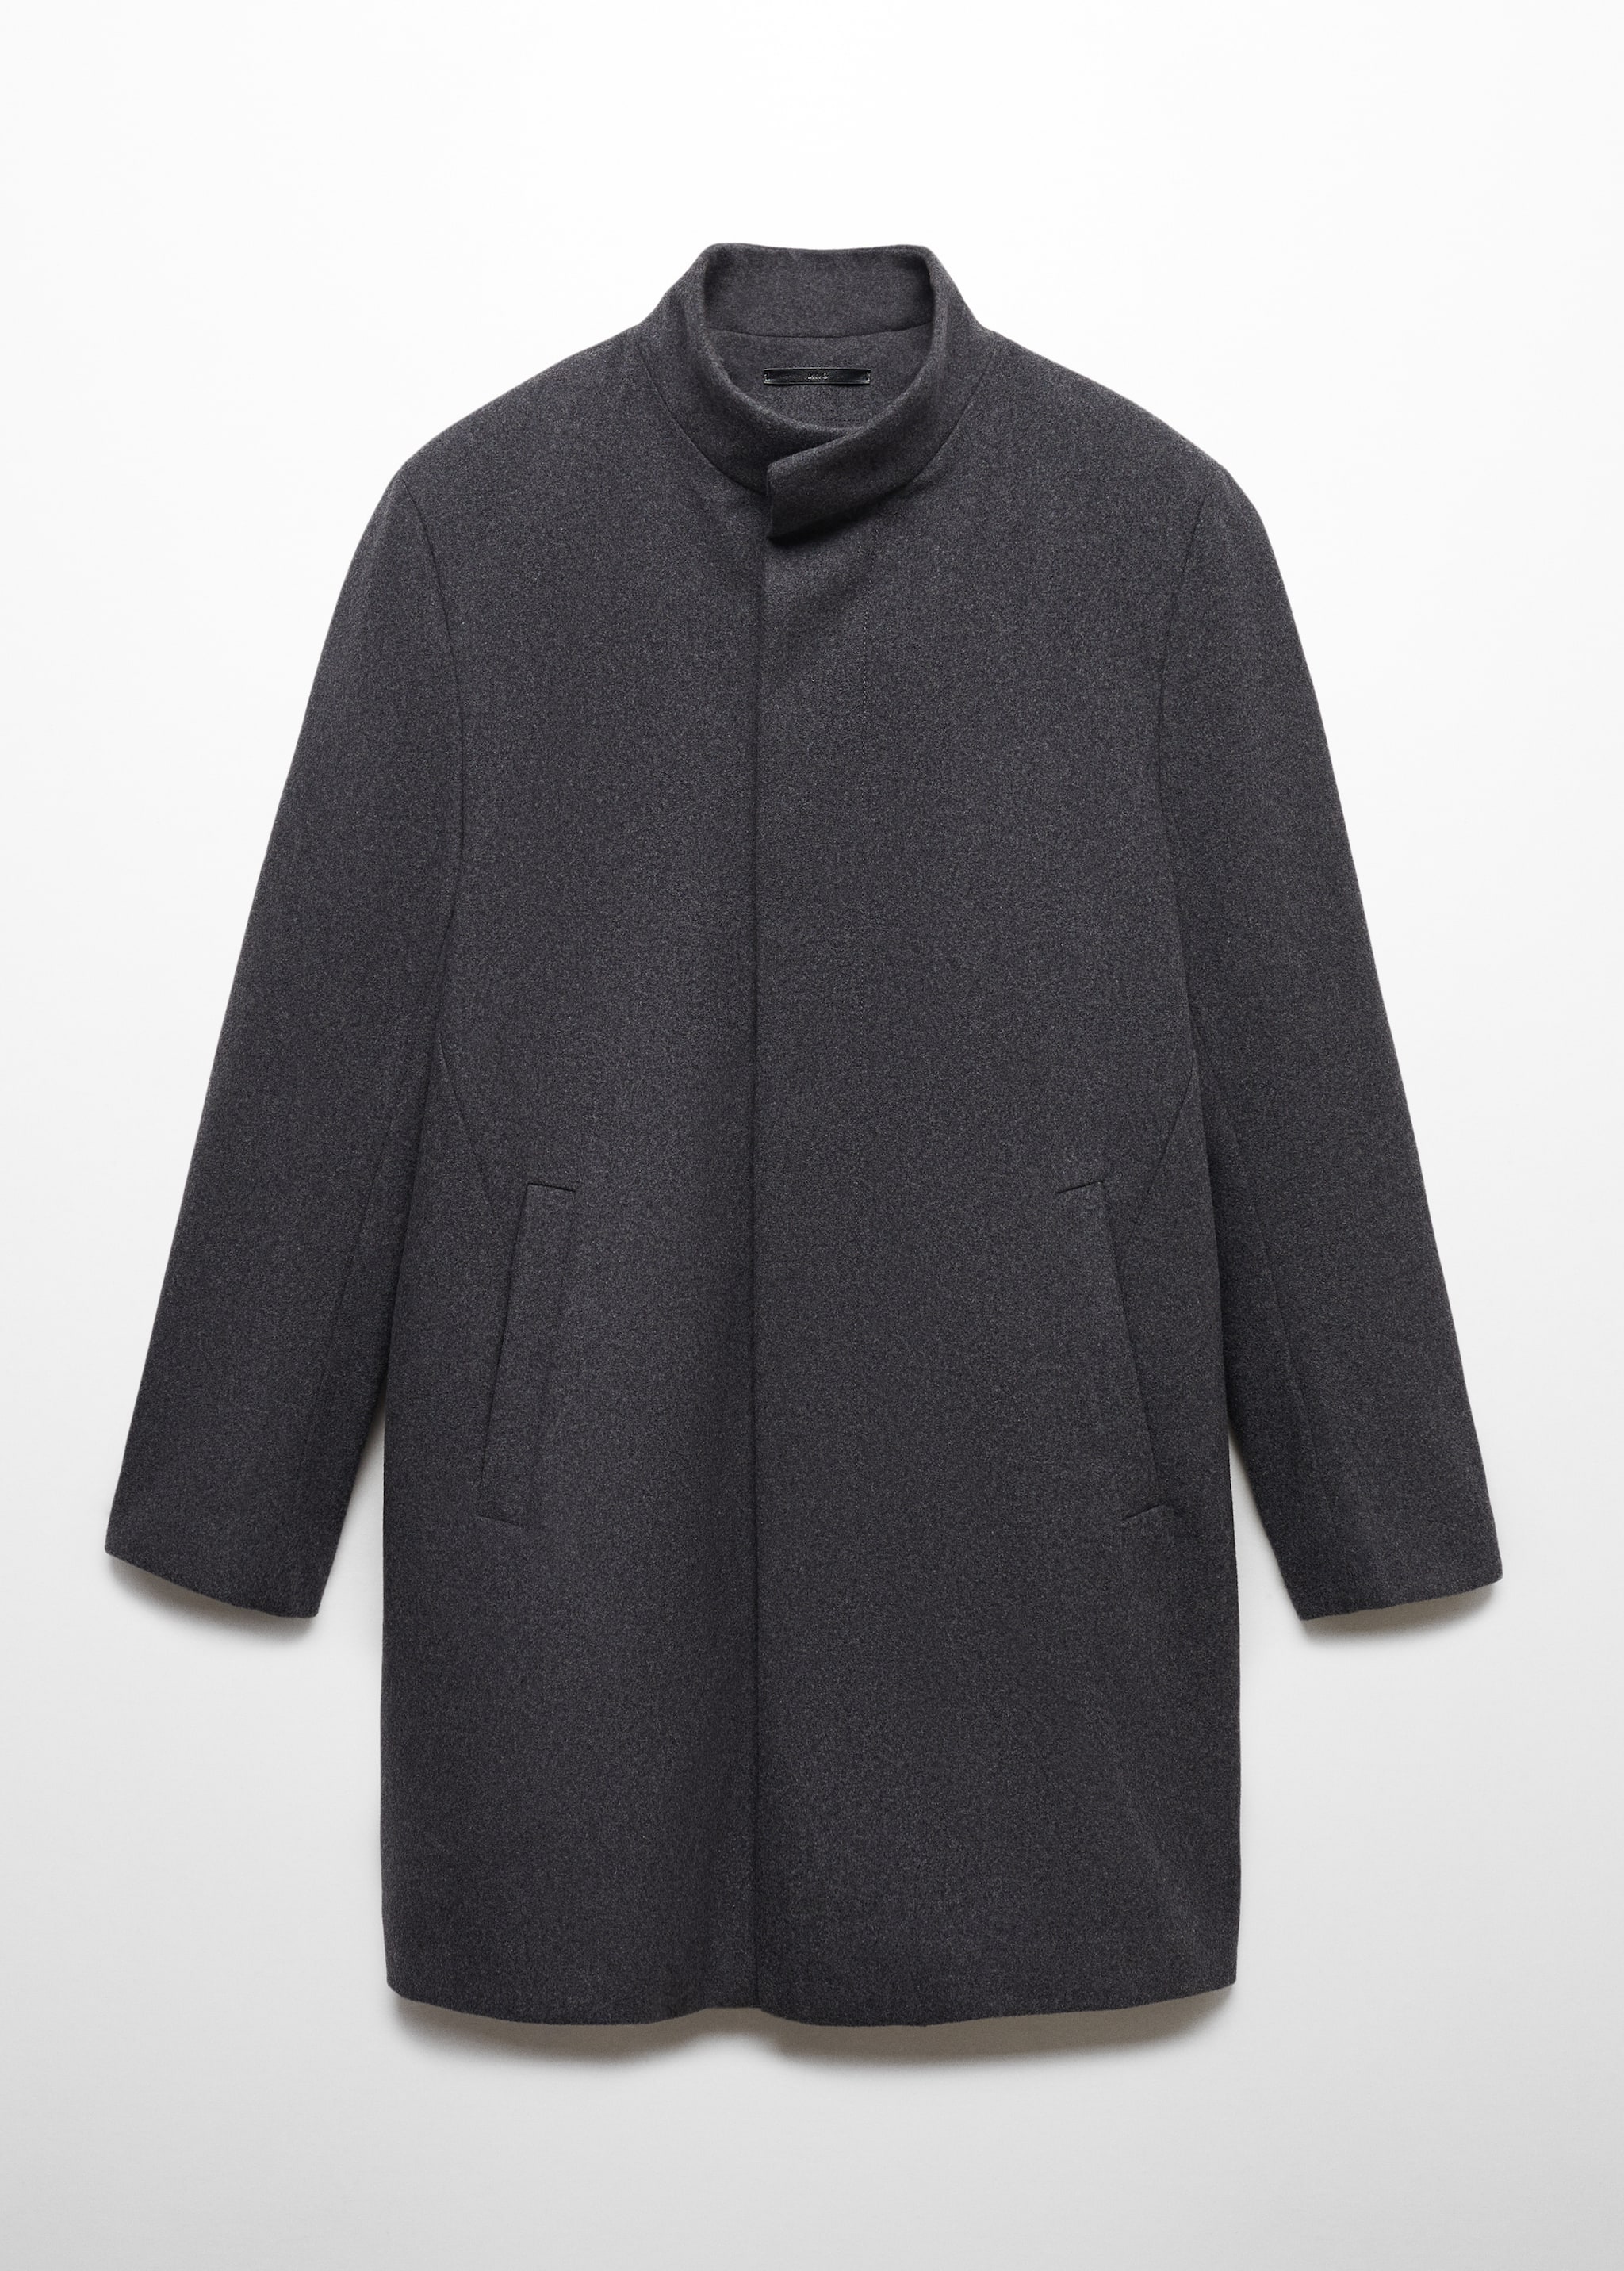 Wool funnel neck coat - Article without model